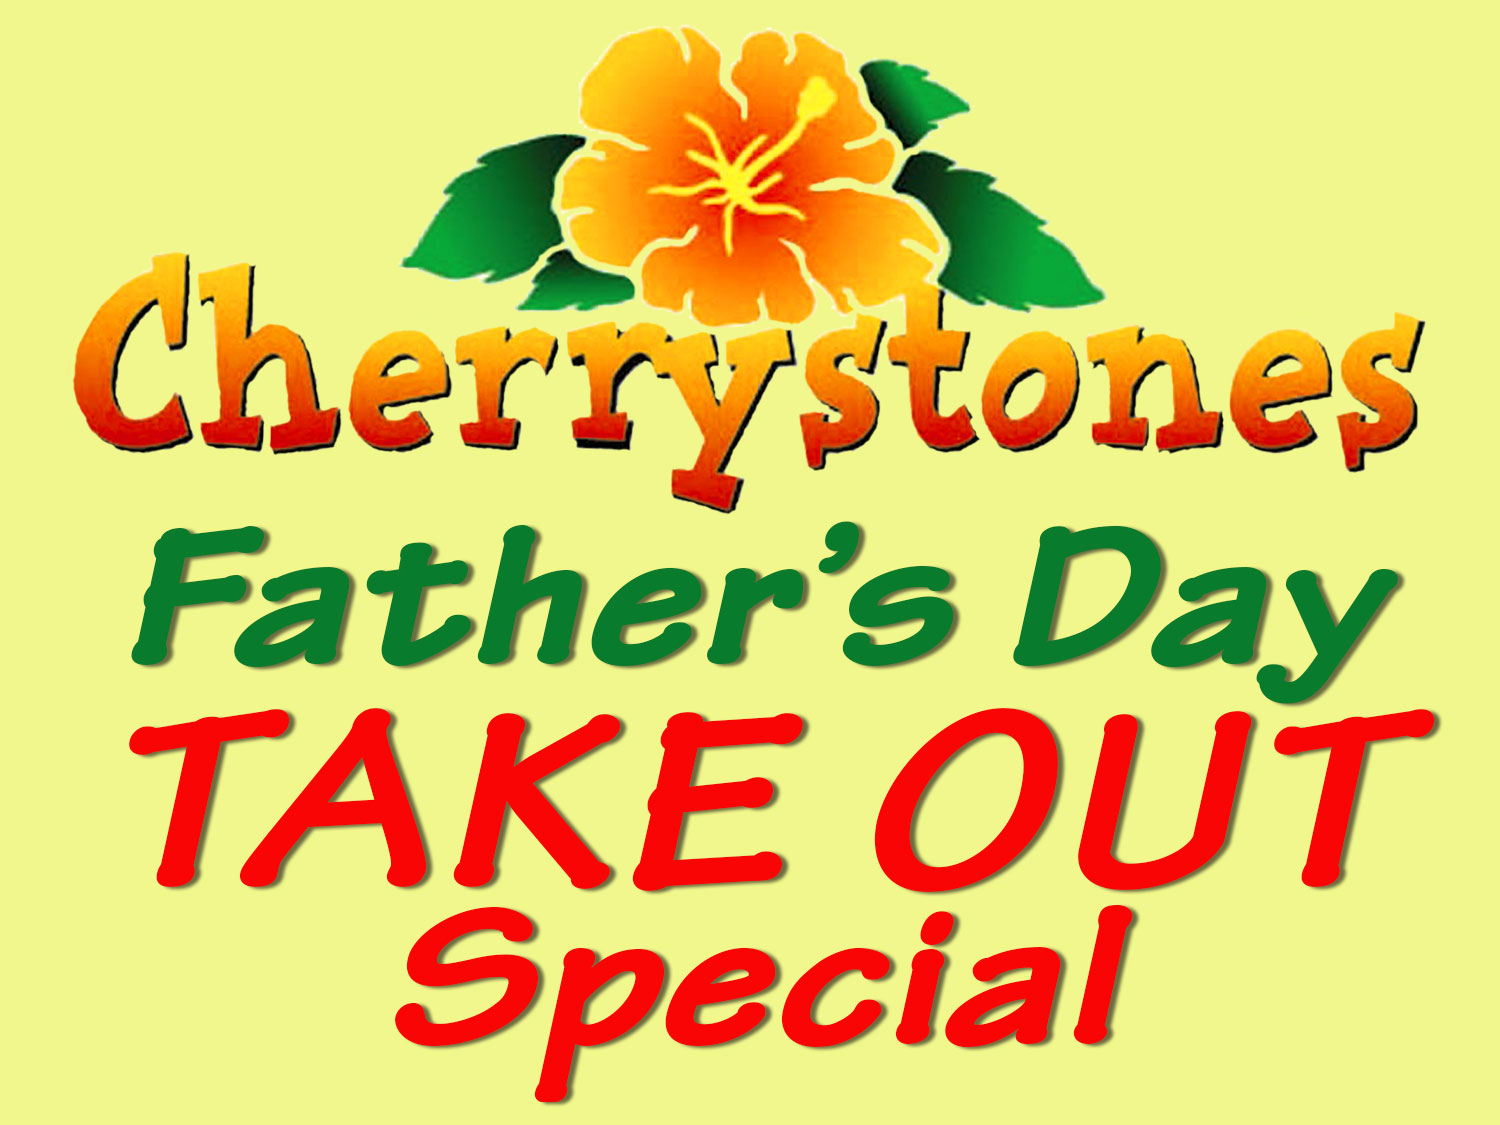 Cherrystone's Father's Day Special